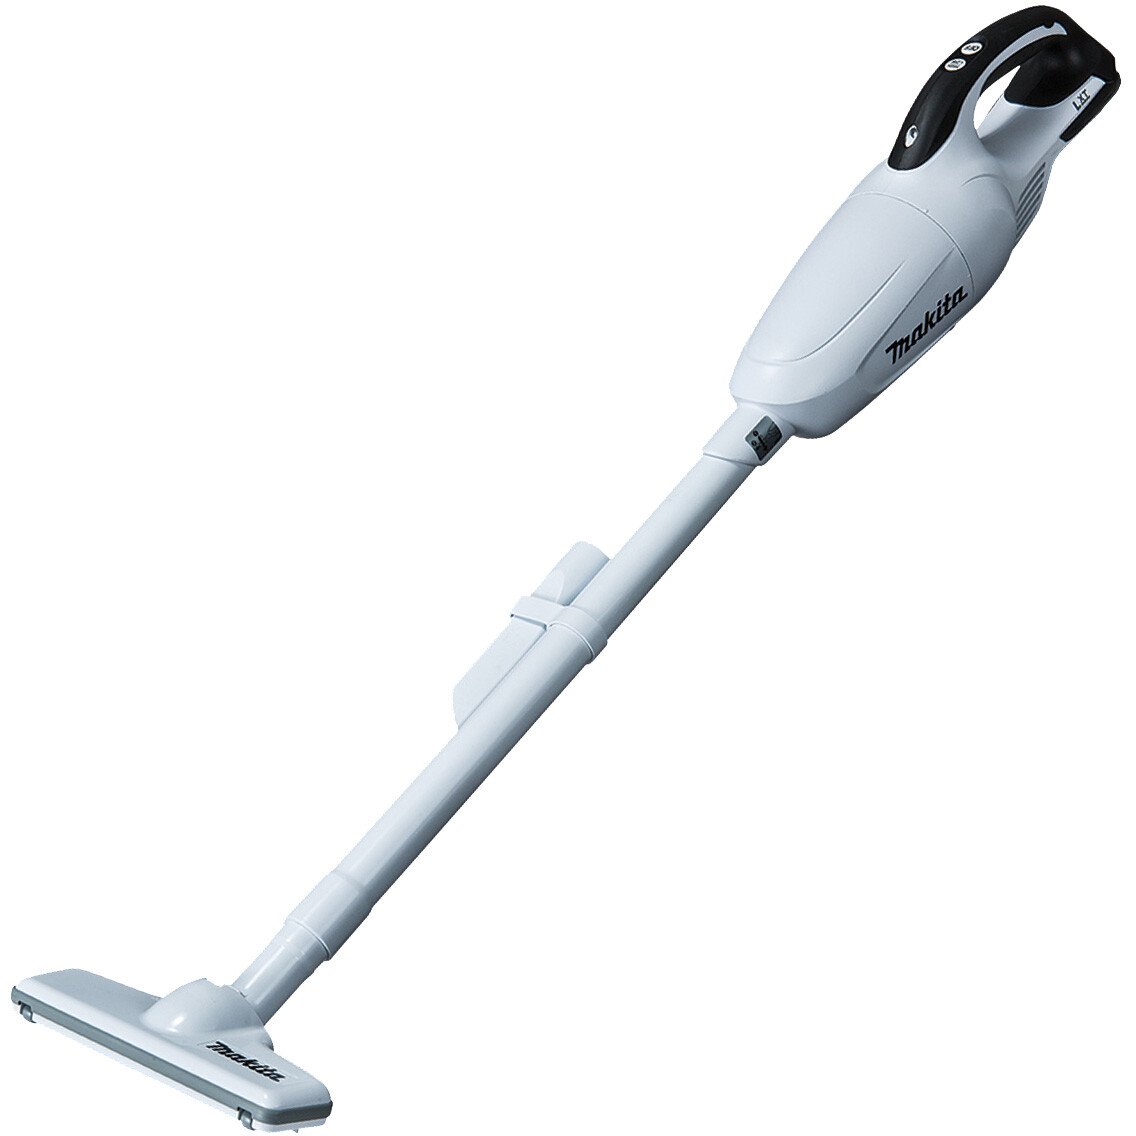 Makita DCL180ZW 18V Li-Ion LXT Vacuum Cleaner (White Edition) - Body Only